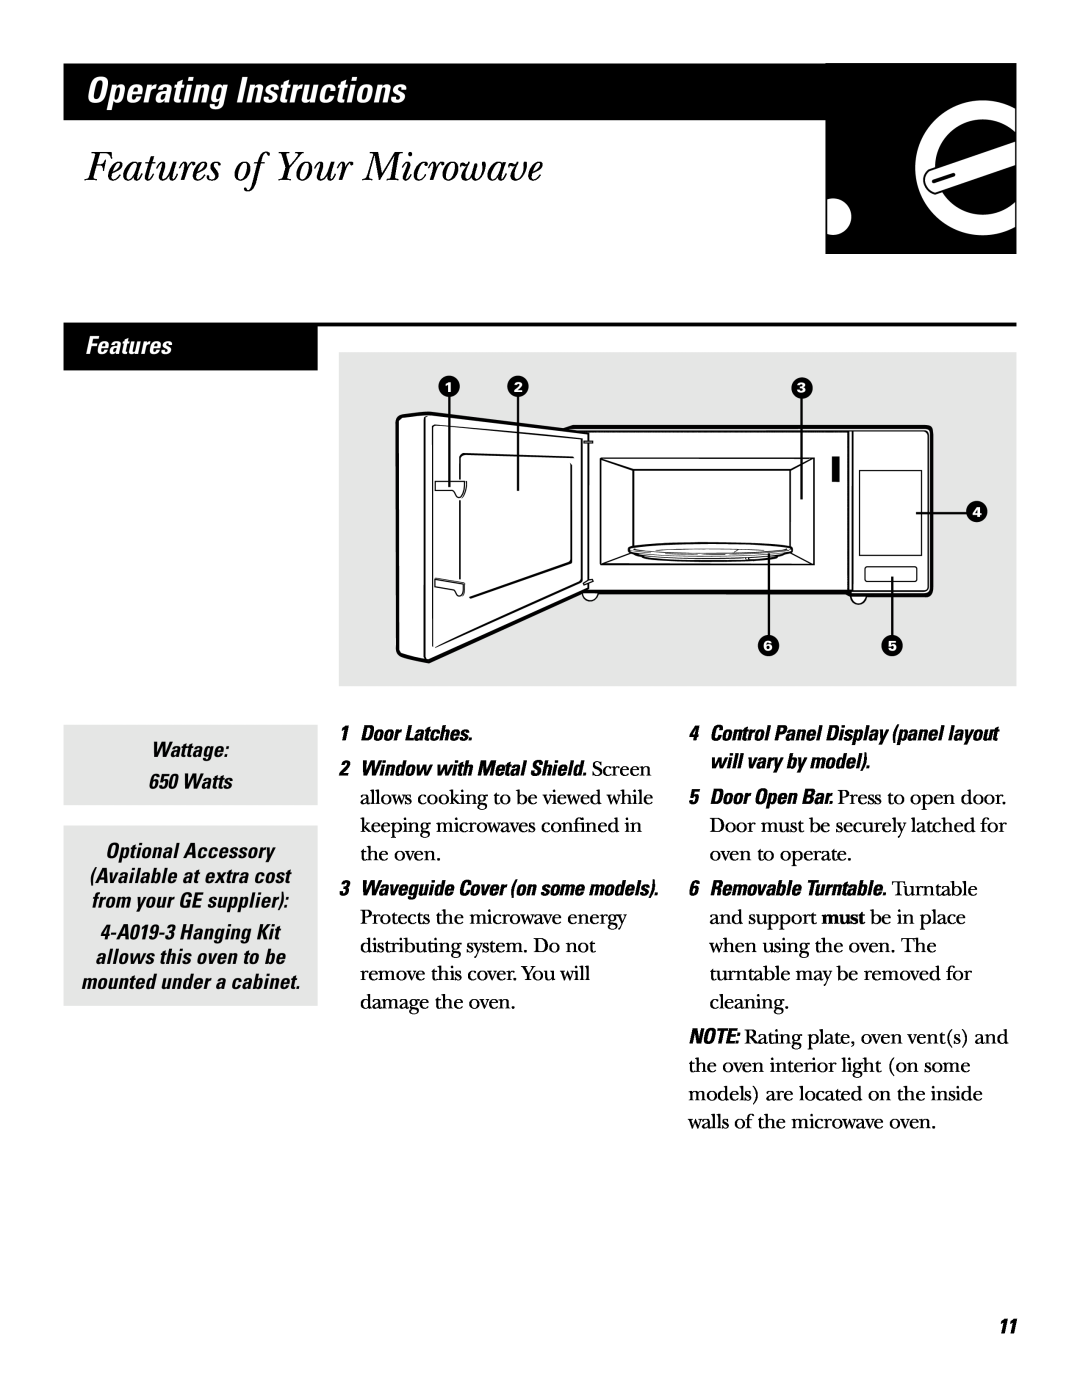 GE JE620, JE610 operating instructions Features of Your Microwave, Operating Instructions 